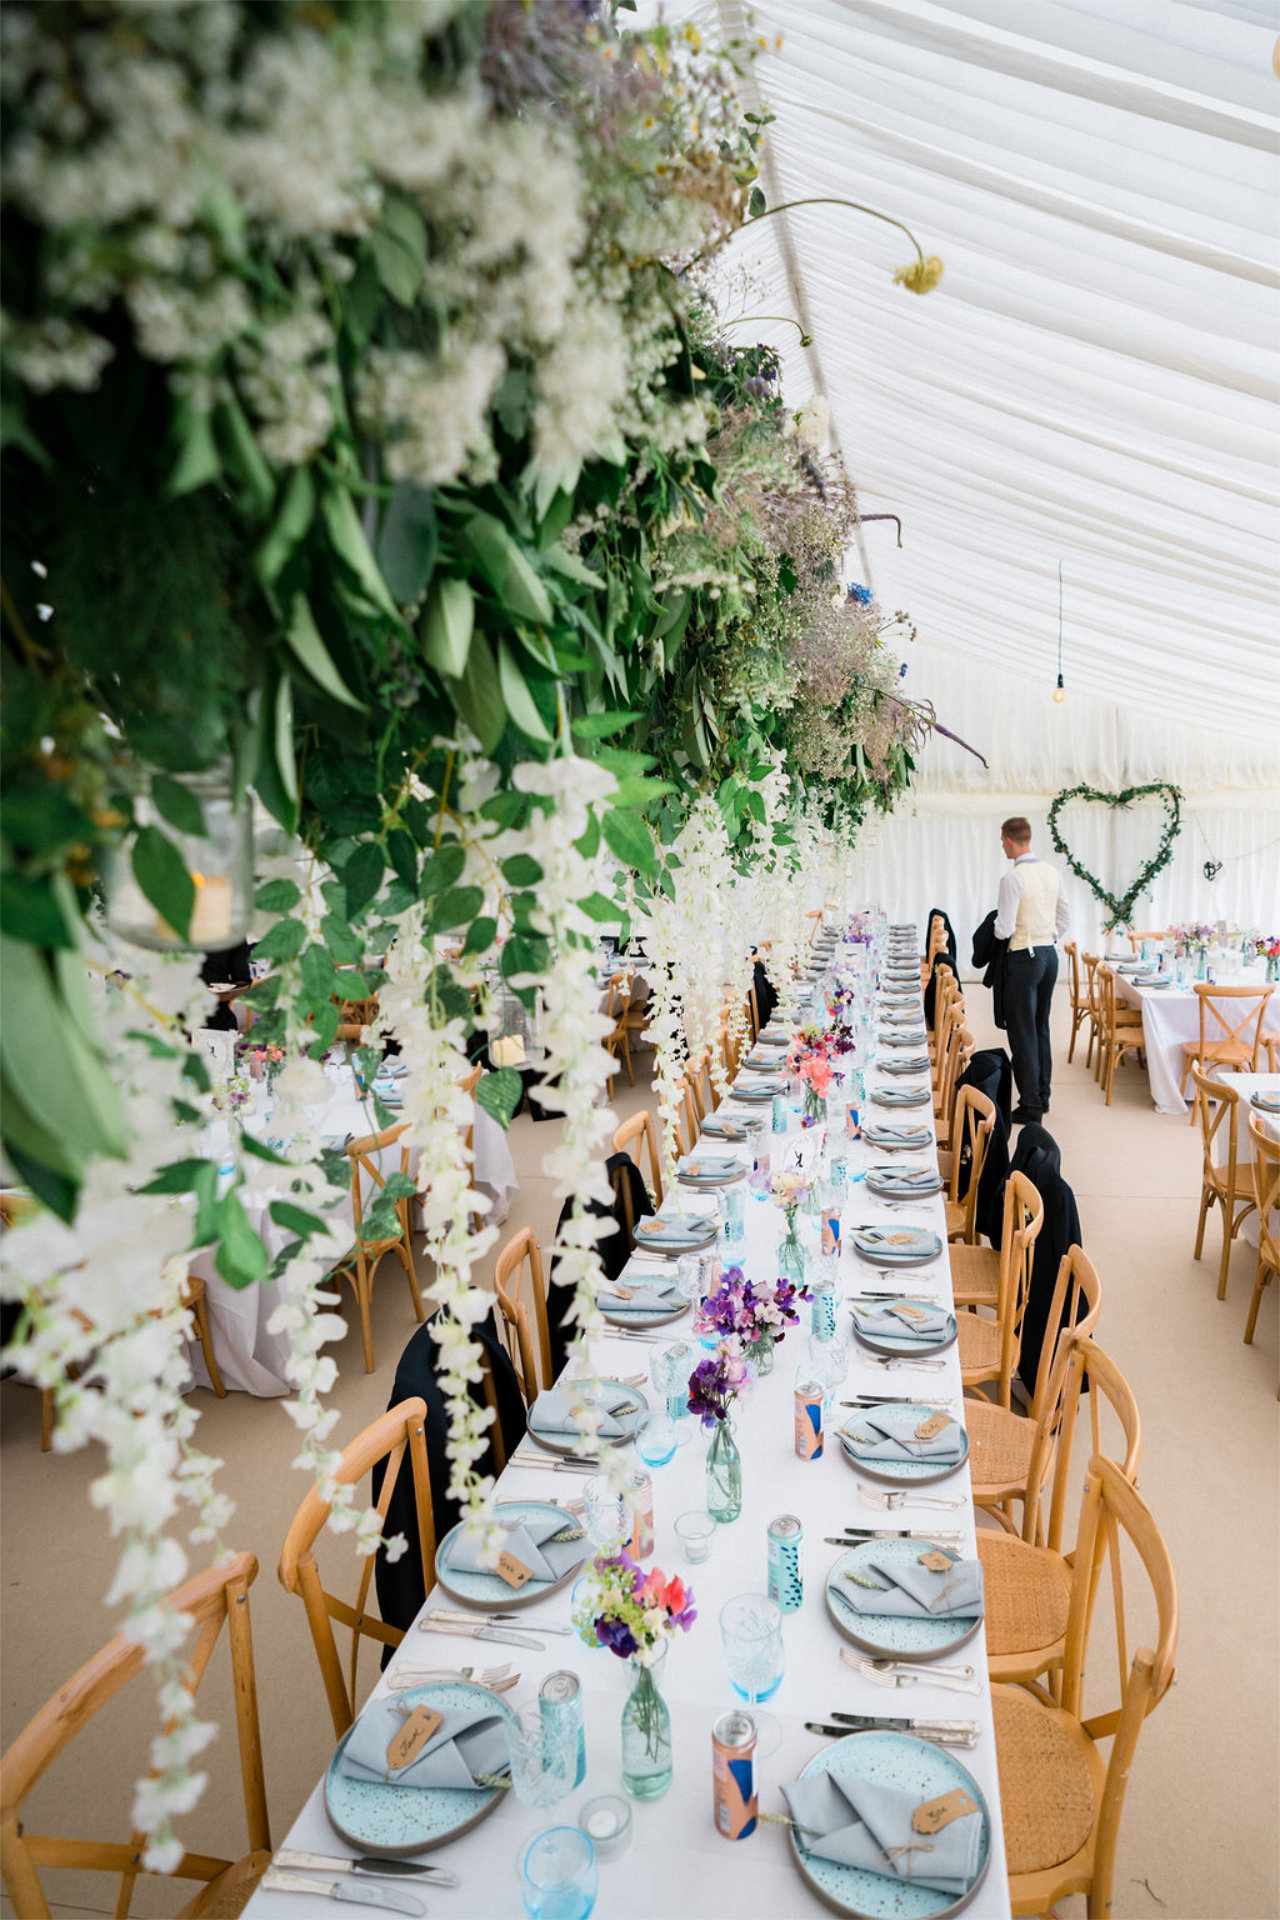 Stunning Wedding Tables with hanging flowers